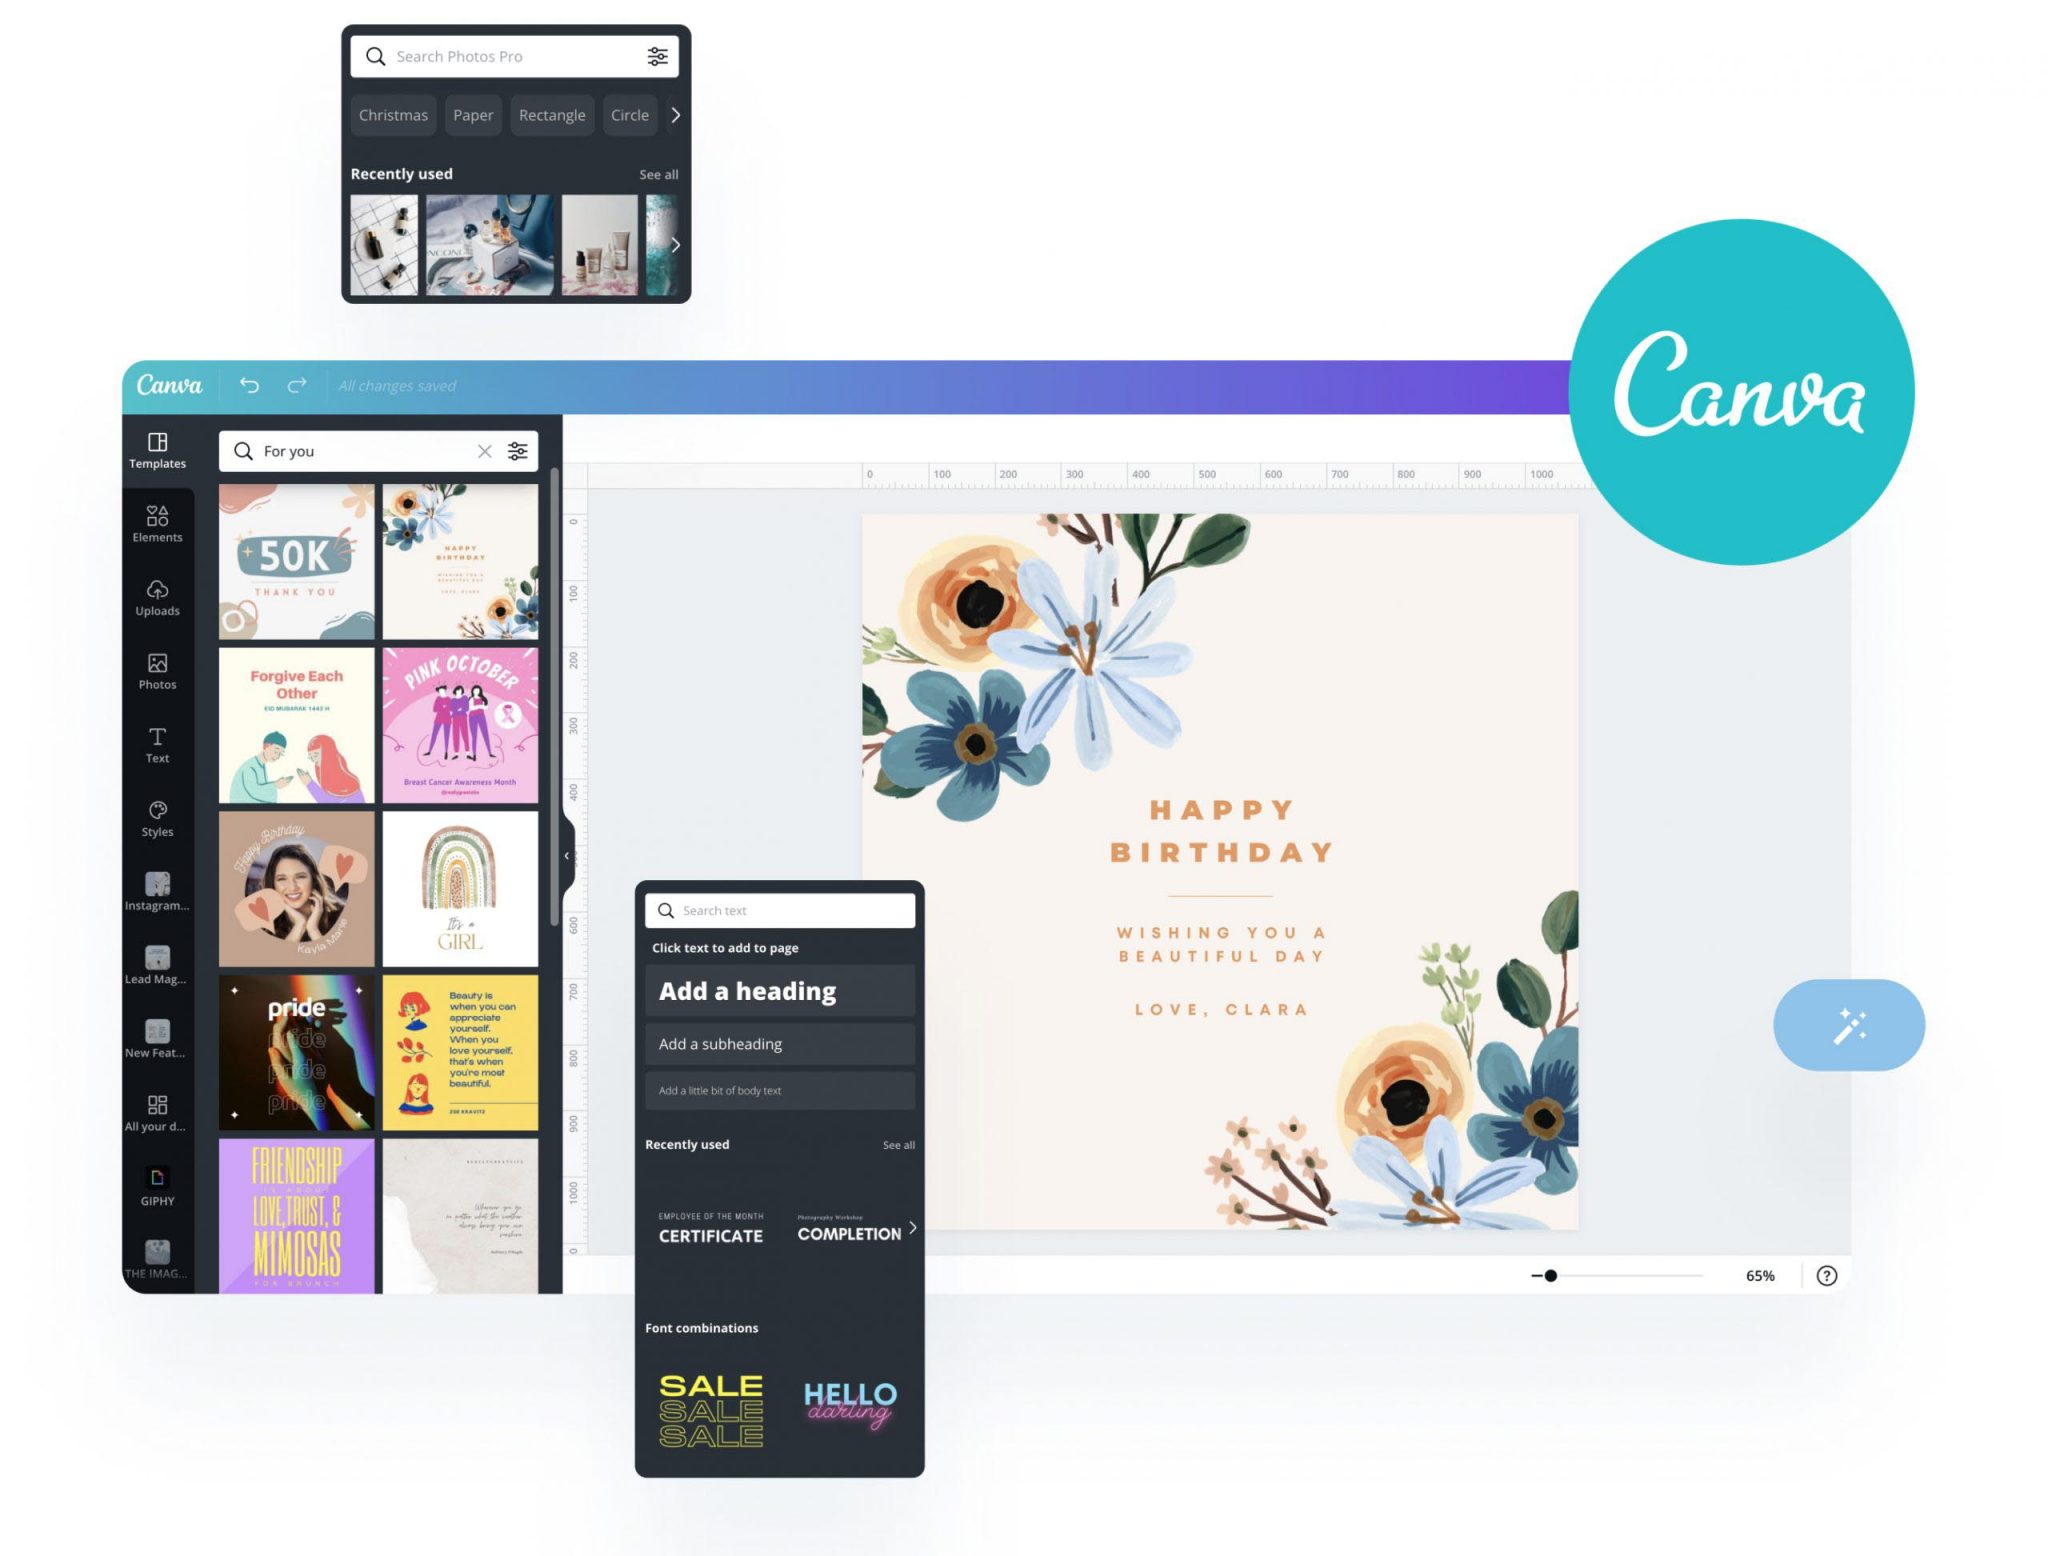 Does Canva Do Email Marketing?